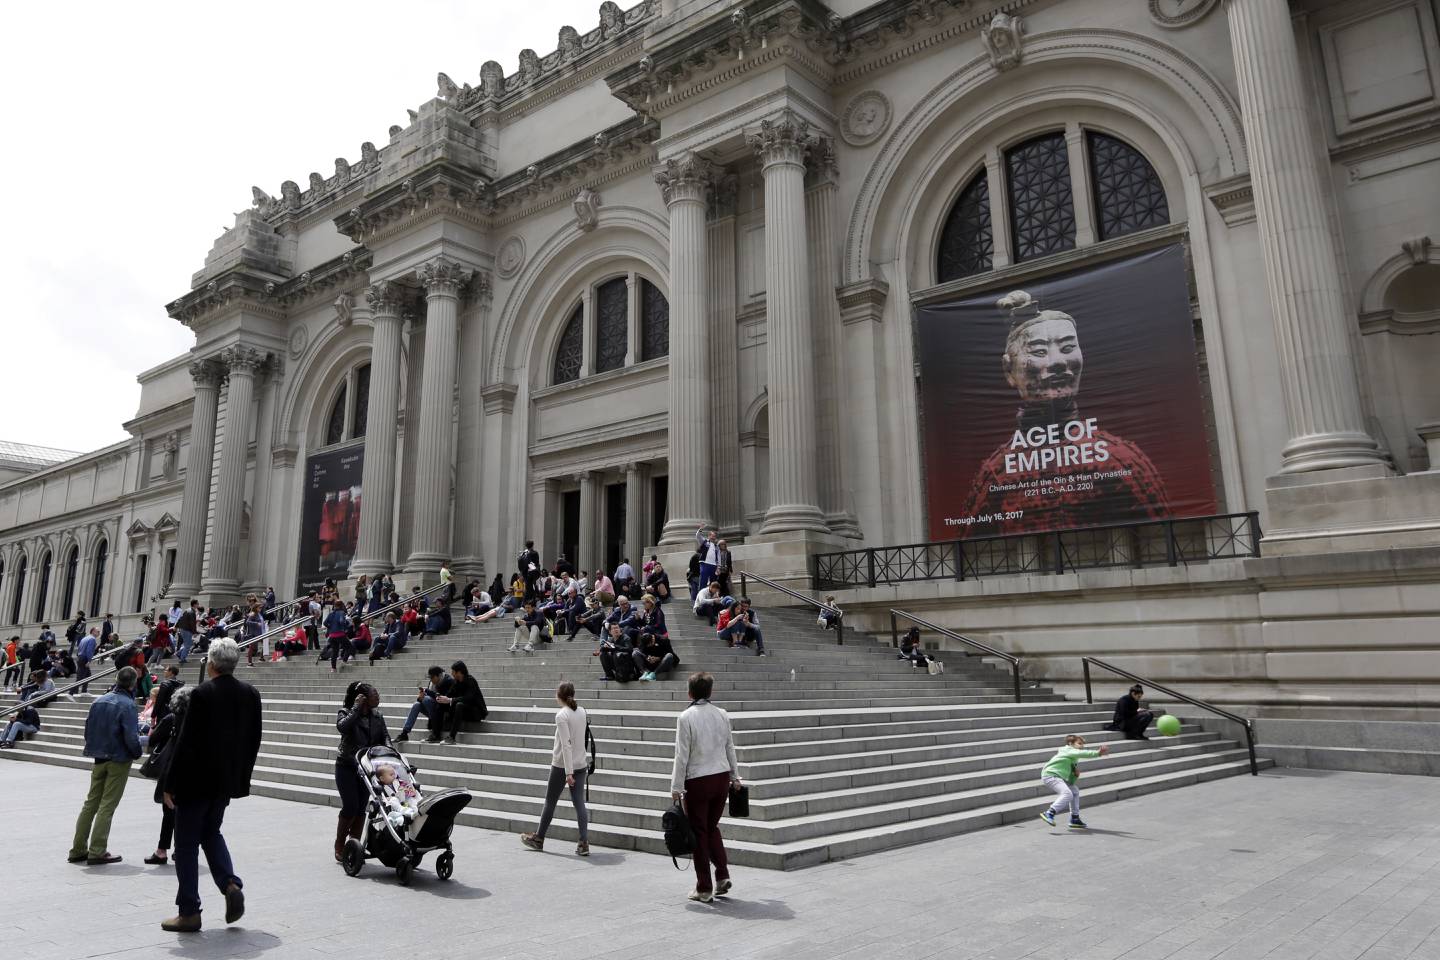 In this May 10, 2017 photo, people sit on the steps at the Fifth Avenue entrance to the Metropolitan Museum of Art in New York. The museum is rebounding from more than a year of internal turmoil and financial problems. As part of its recovery efforts, the museum is considering a mandatory admissions fee for visitors from outside New York state. (AP Photo/Richard Drew)